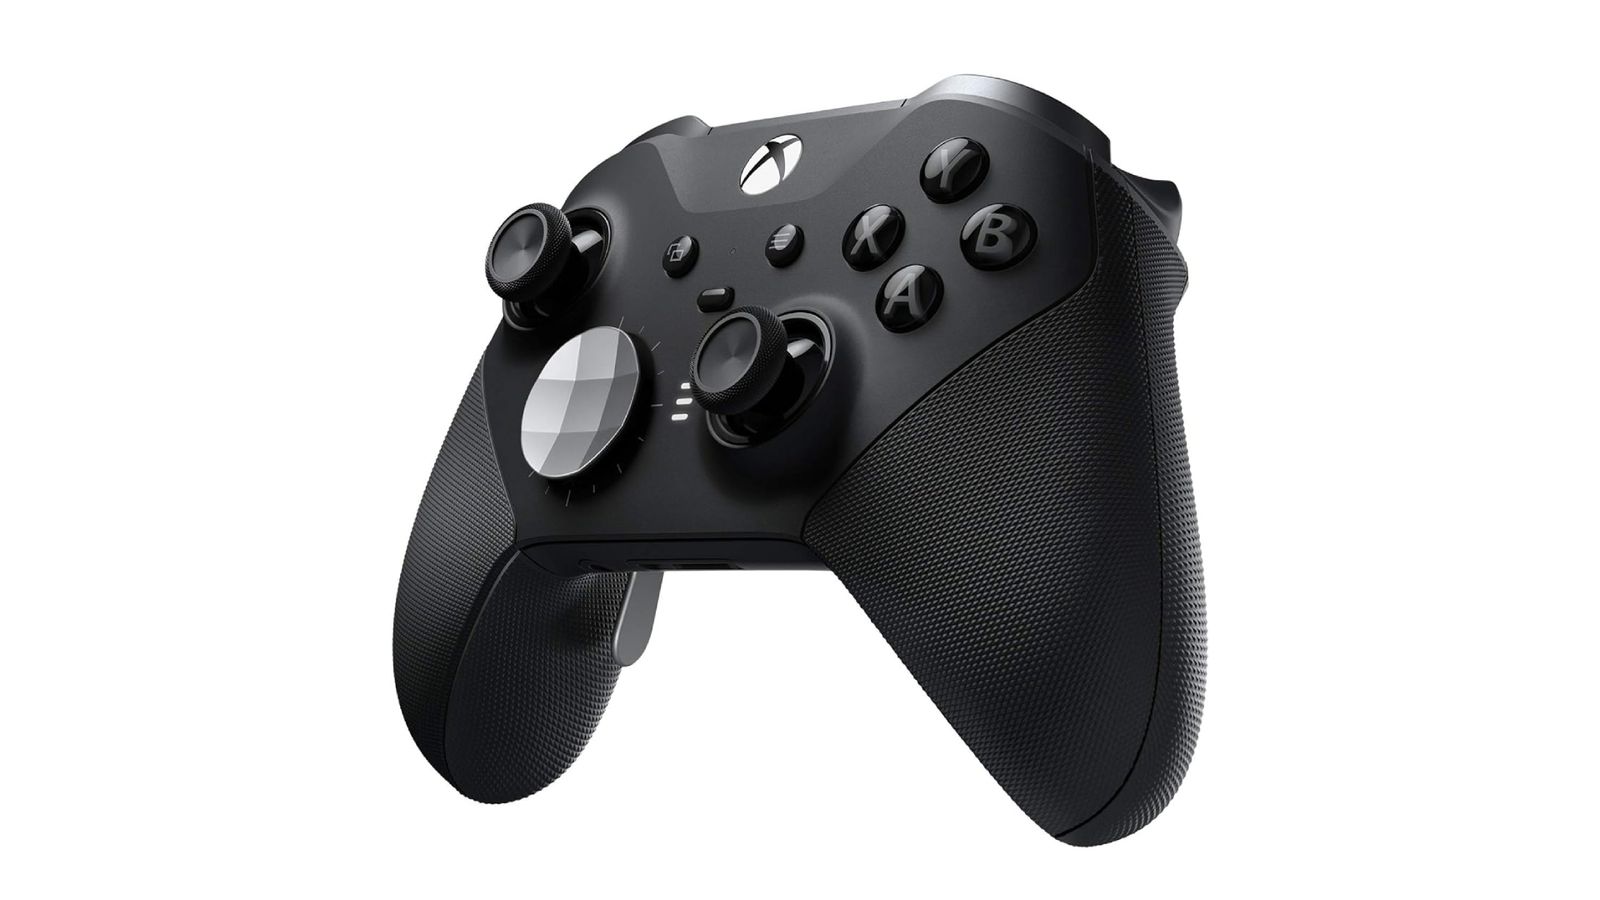 Xbox Elite Series 2 product image of a black Xbox-style gamepad featuring a white and grey gradient thumb pad on the left.